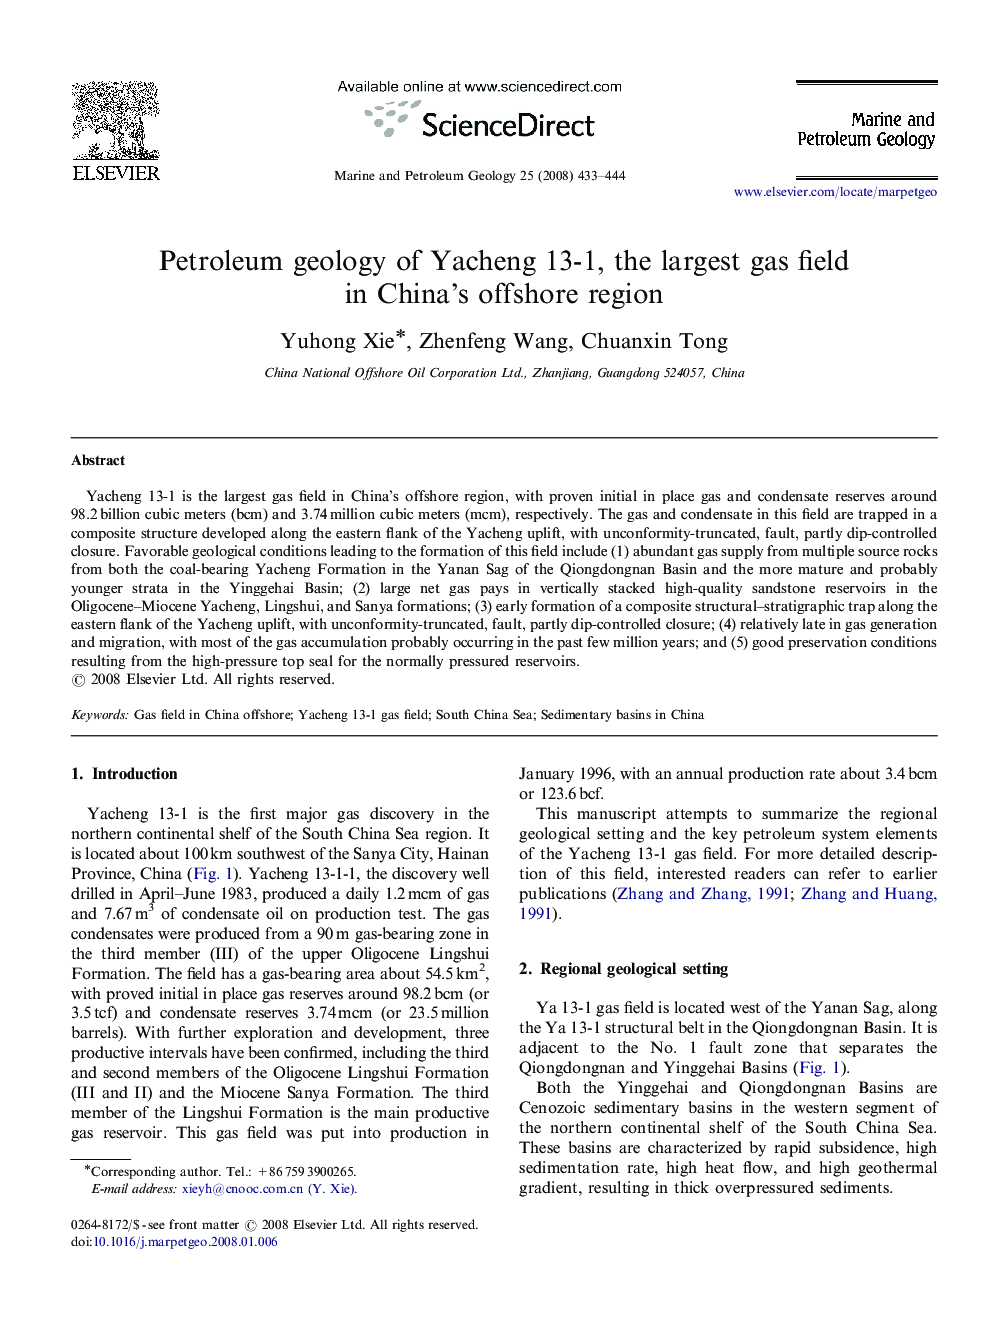 Petroleum geology of Yacheng 13-1, the largest gas field in China's offshore region